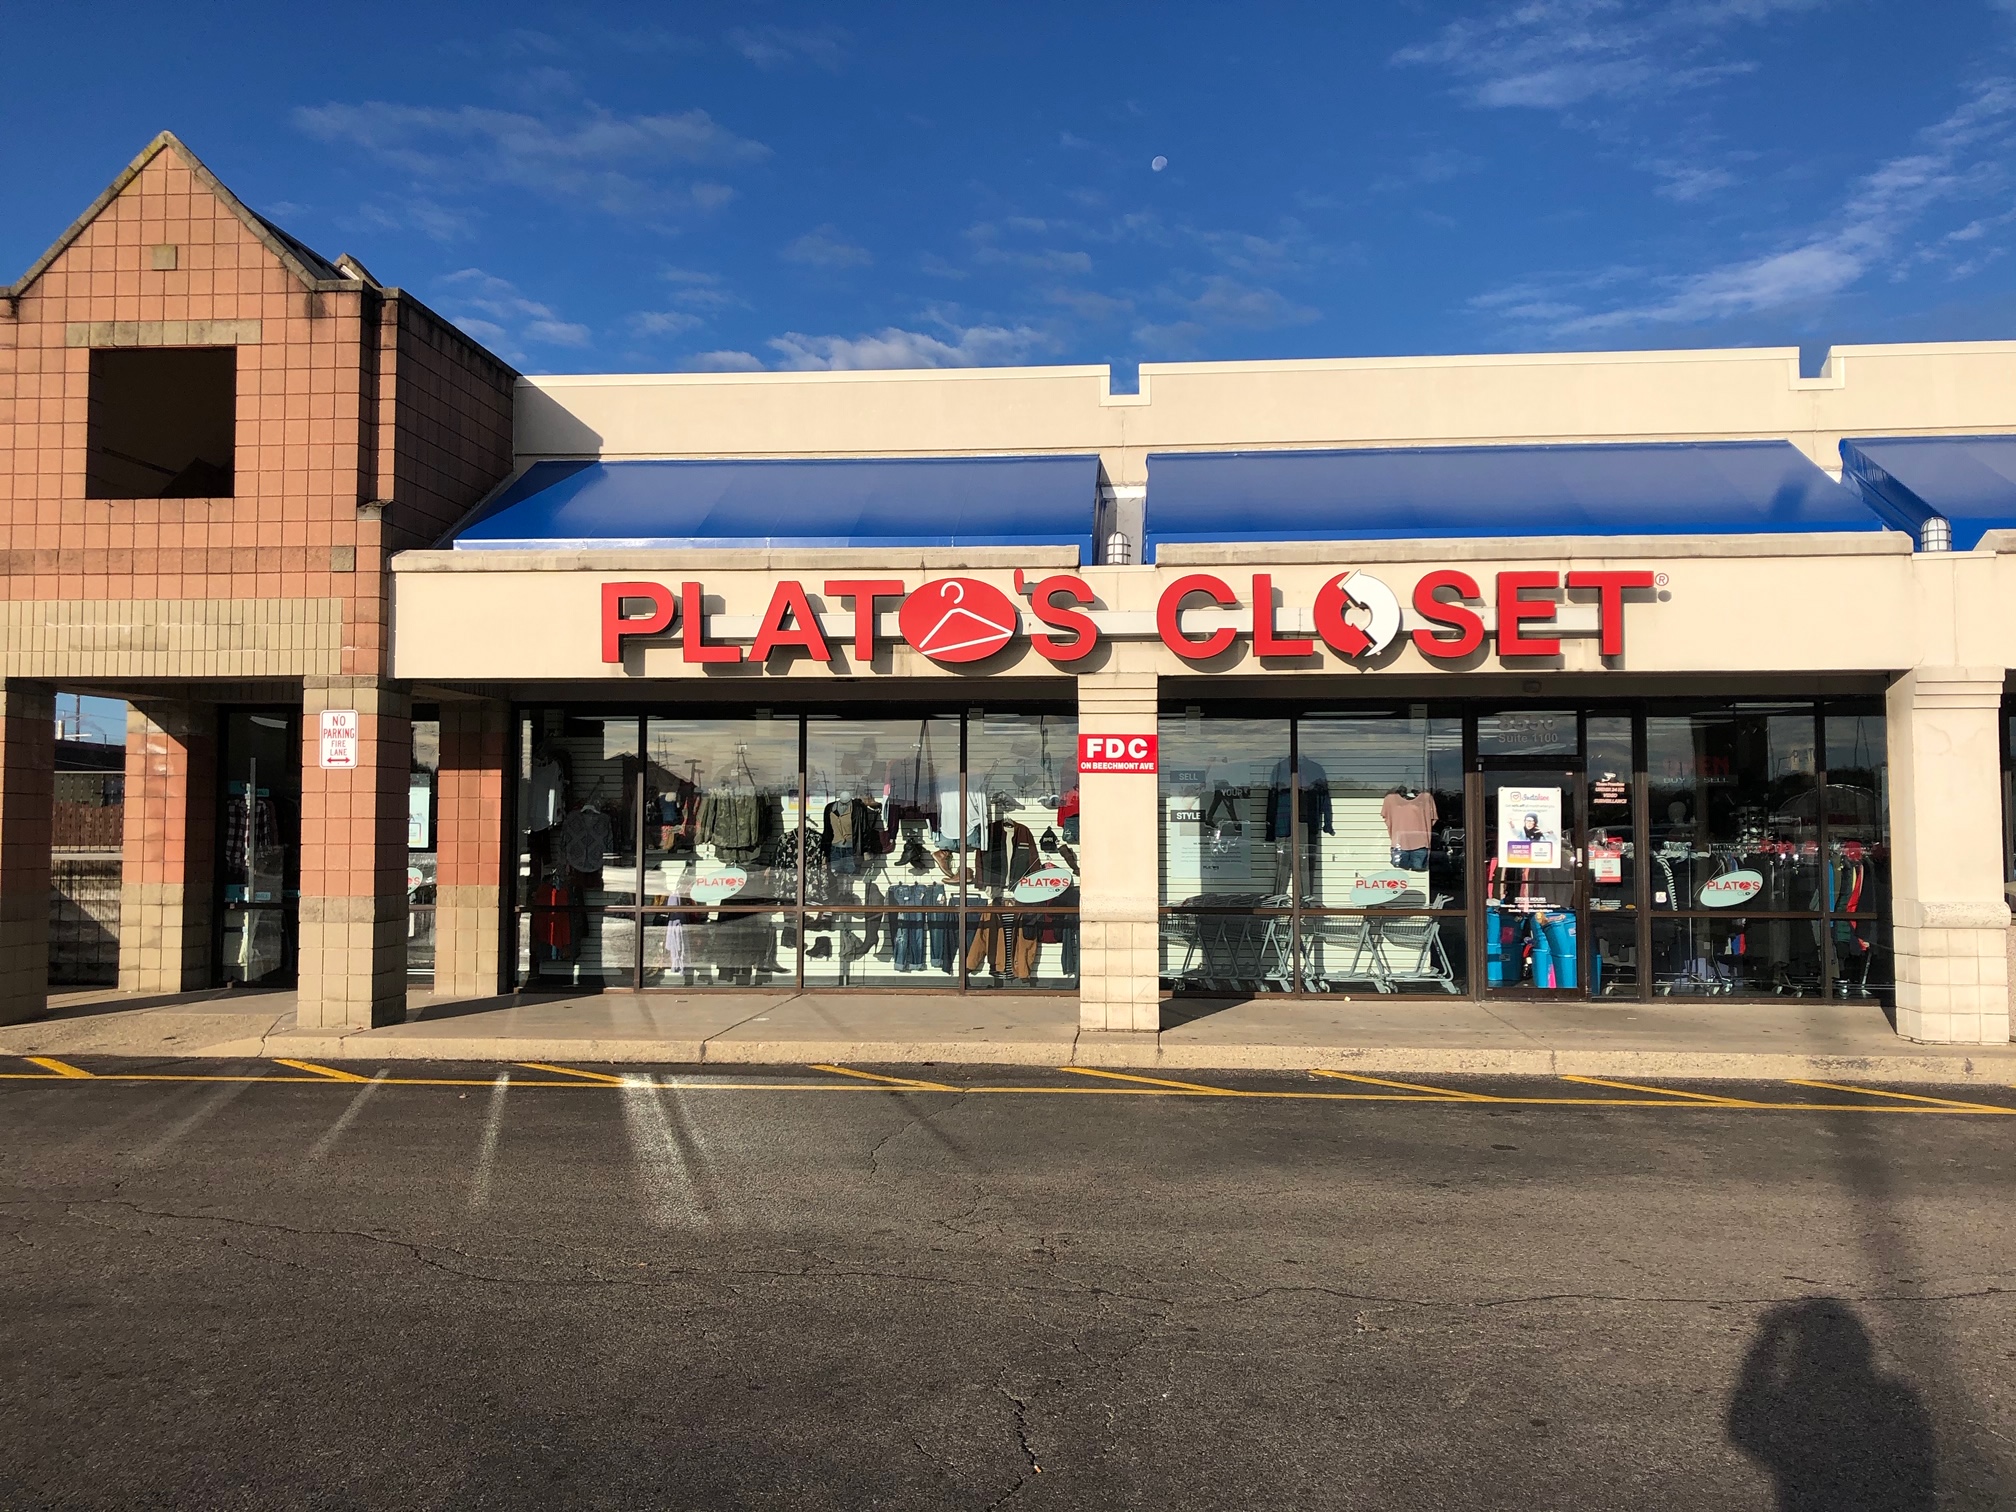 Sale on Select Shoes at Plato's Closet